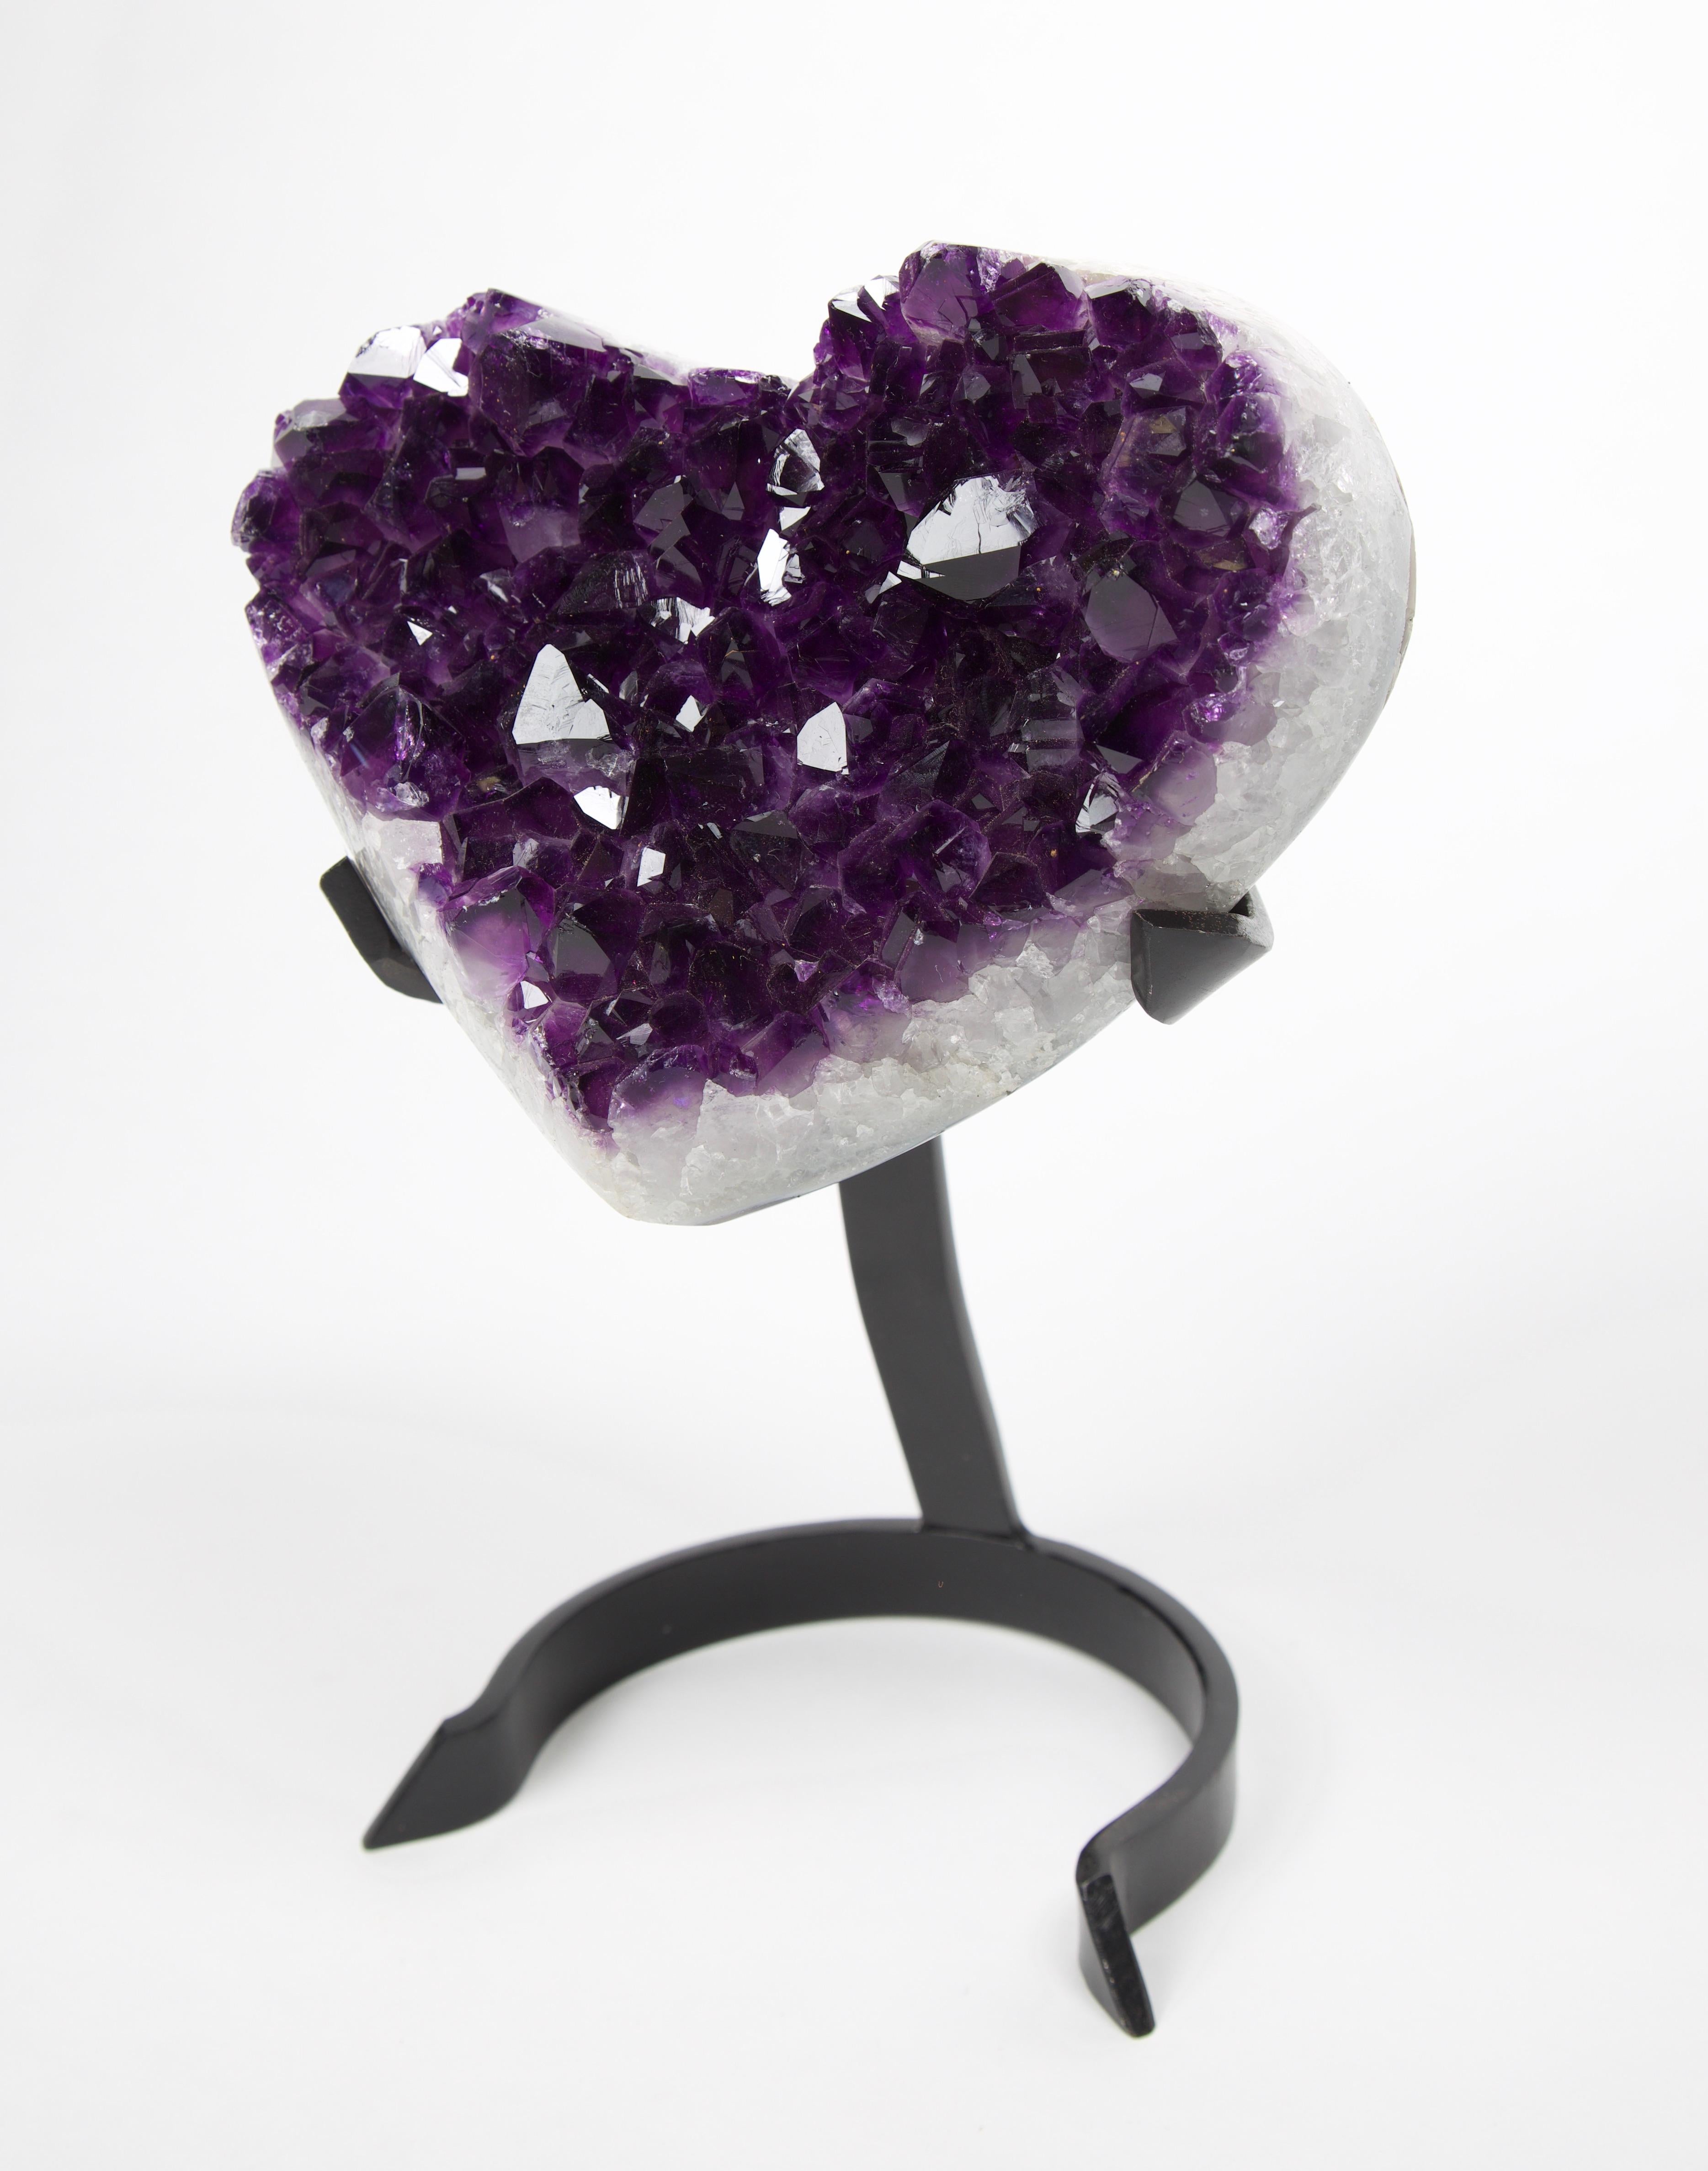 Heart-shaped Amethyst geode on a black metal stand. With polished edges, this amethyst has deep, vibrant violet colors. Local artisans in Uruguay mastered the technique to make heart-shaped gemstones but it's a very labor-intense task that requires